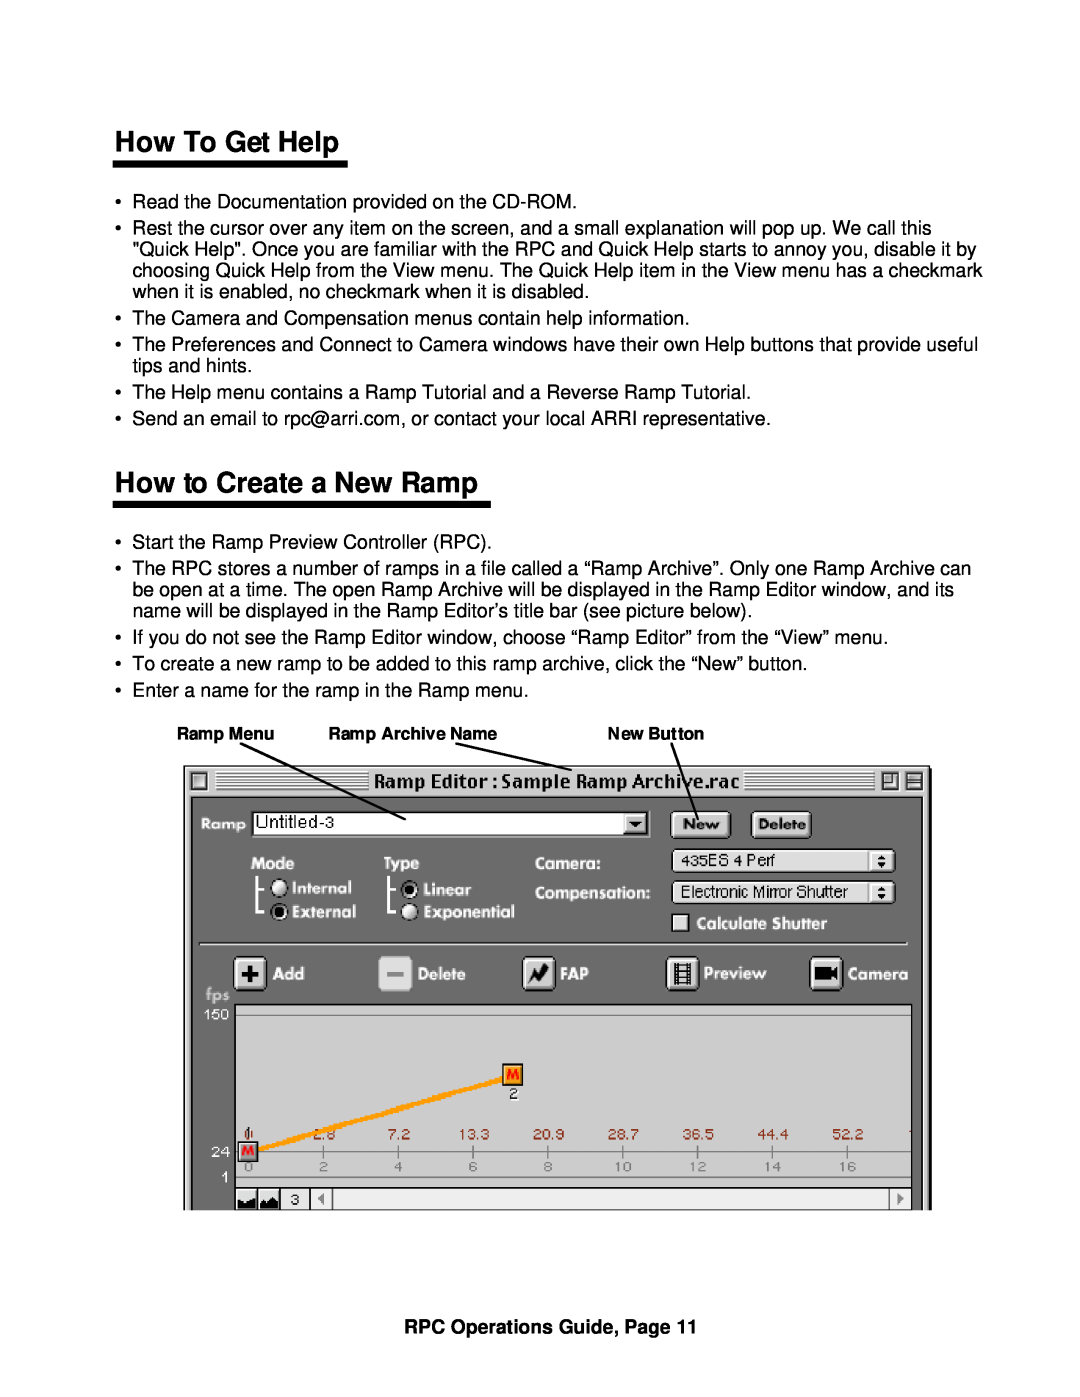 ARRI ARRI Ramp Preview Controller manual How To Get Help, How to Create a New Ramp, RPC Operations Guide, Page 